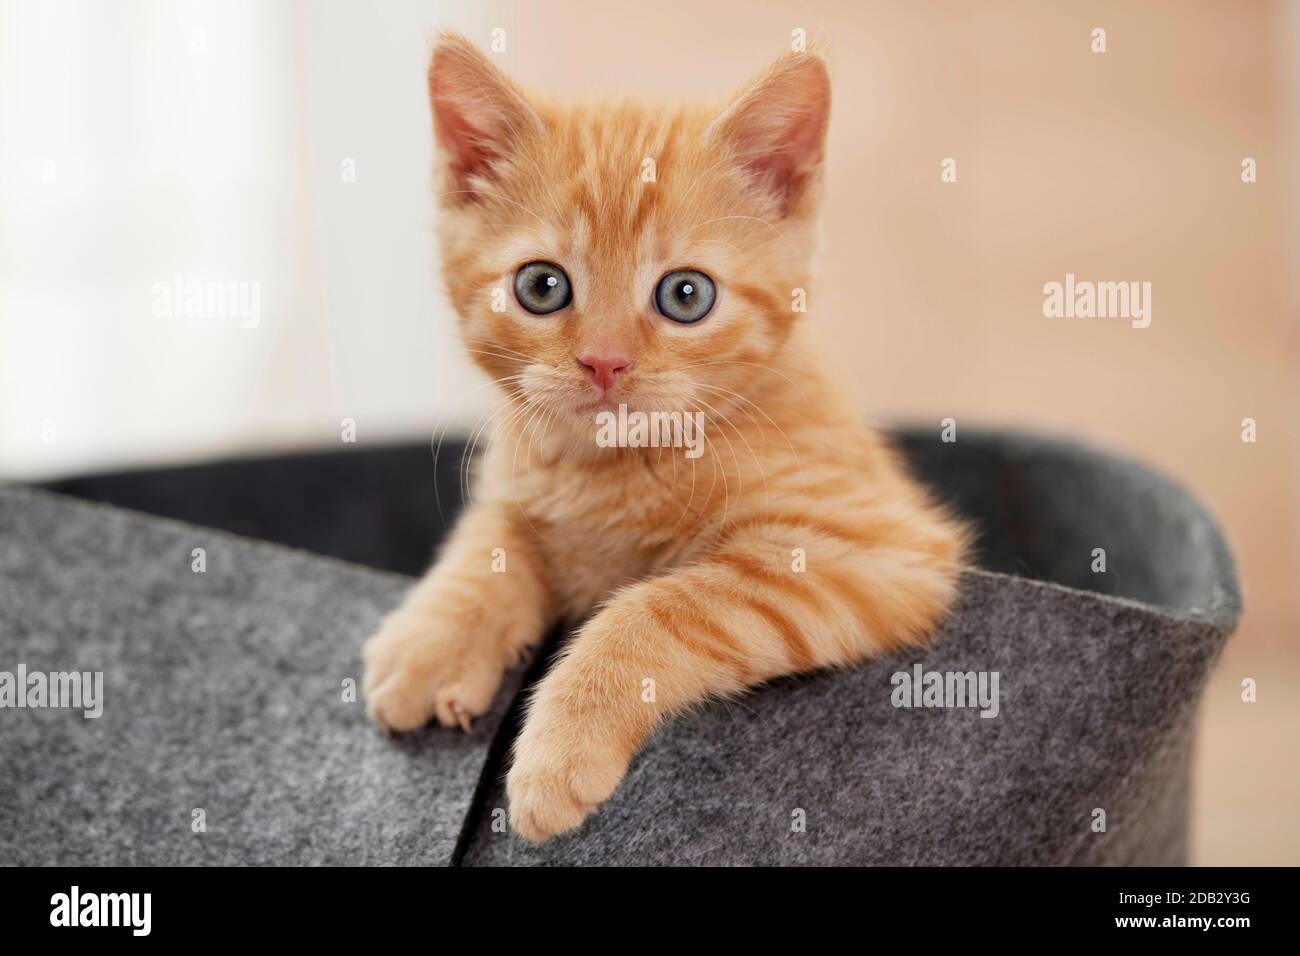 Domestic cat. Kitten in a pet bed. Germany Stock Photo